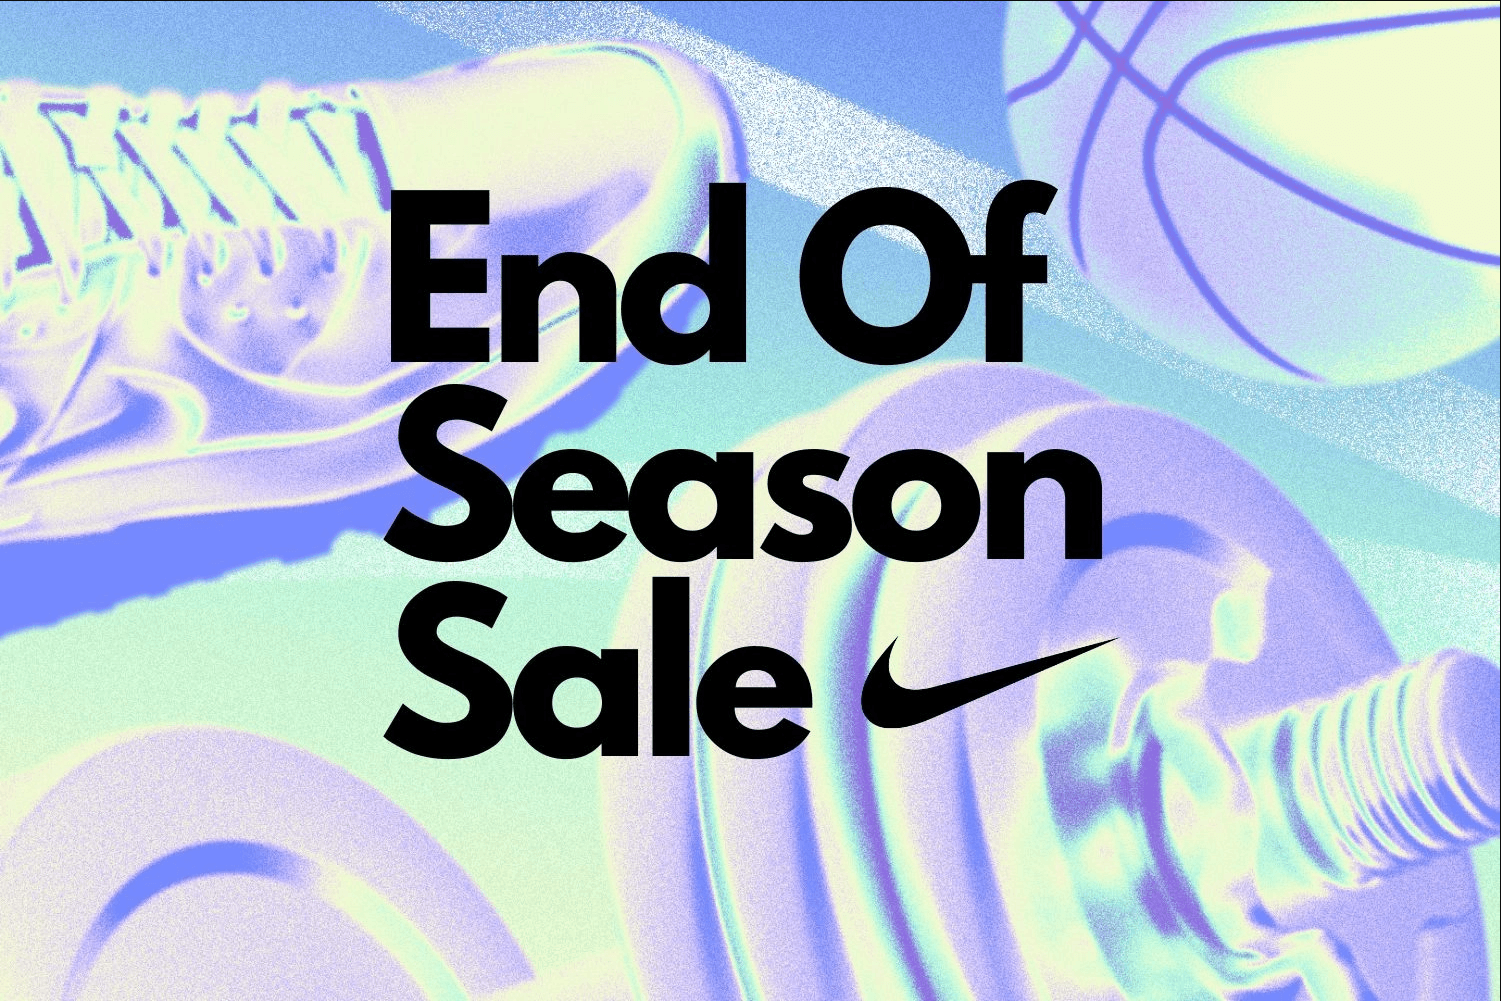 The Nike End of Season Sale with up to 50% has been extended